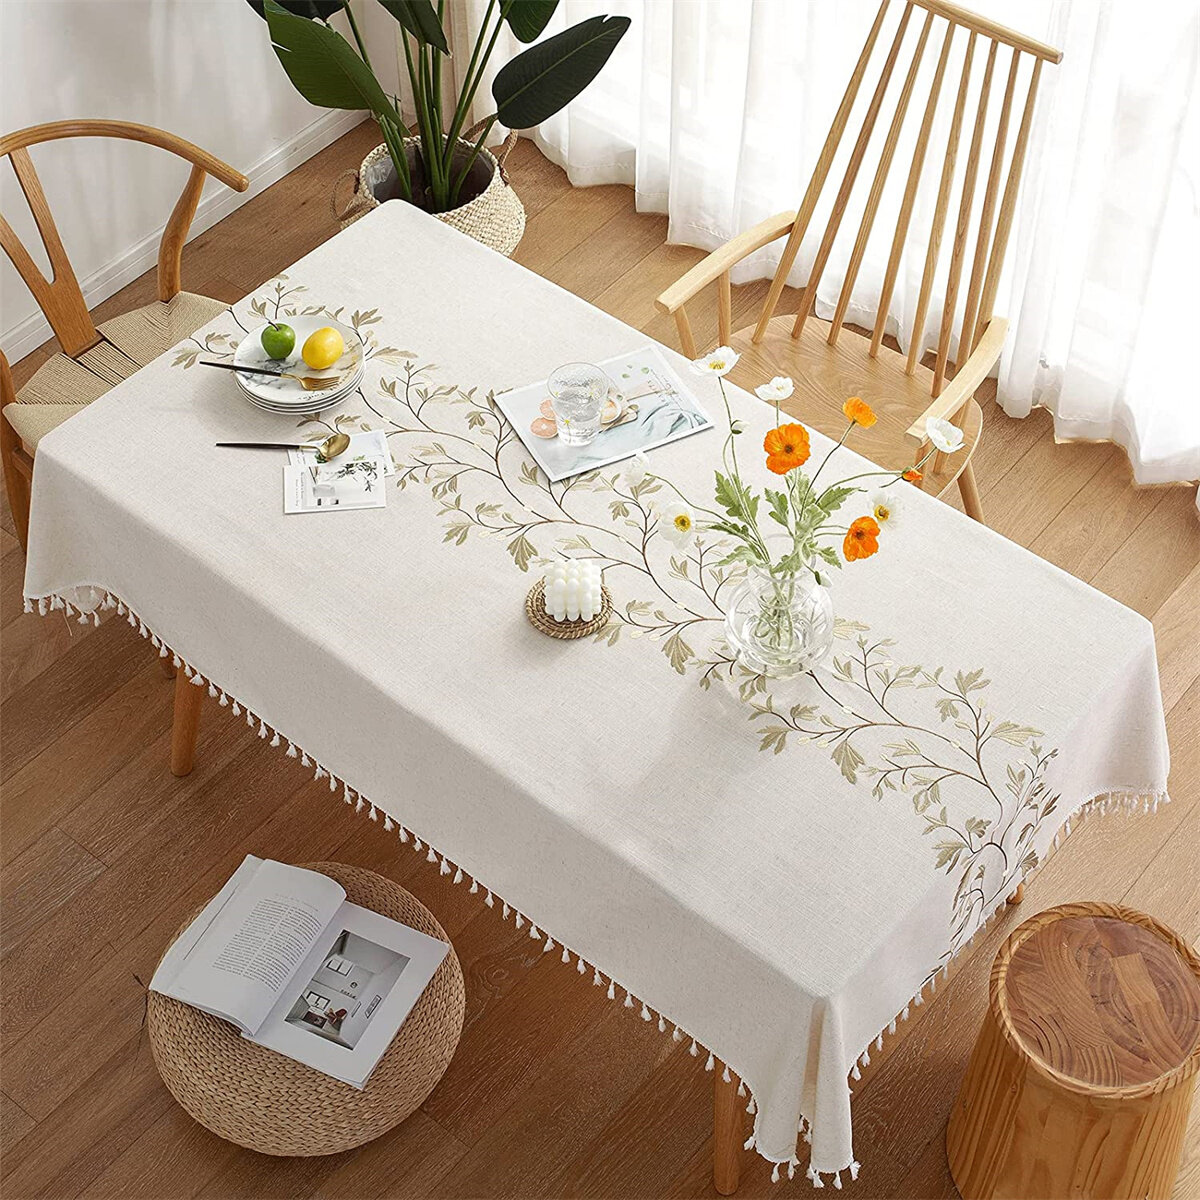 Cotton Linen Square Tablecloth Garden Dining Kitchen Tableware Party Decoration